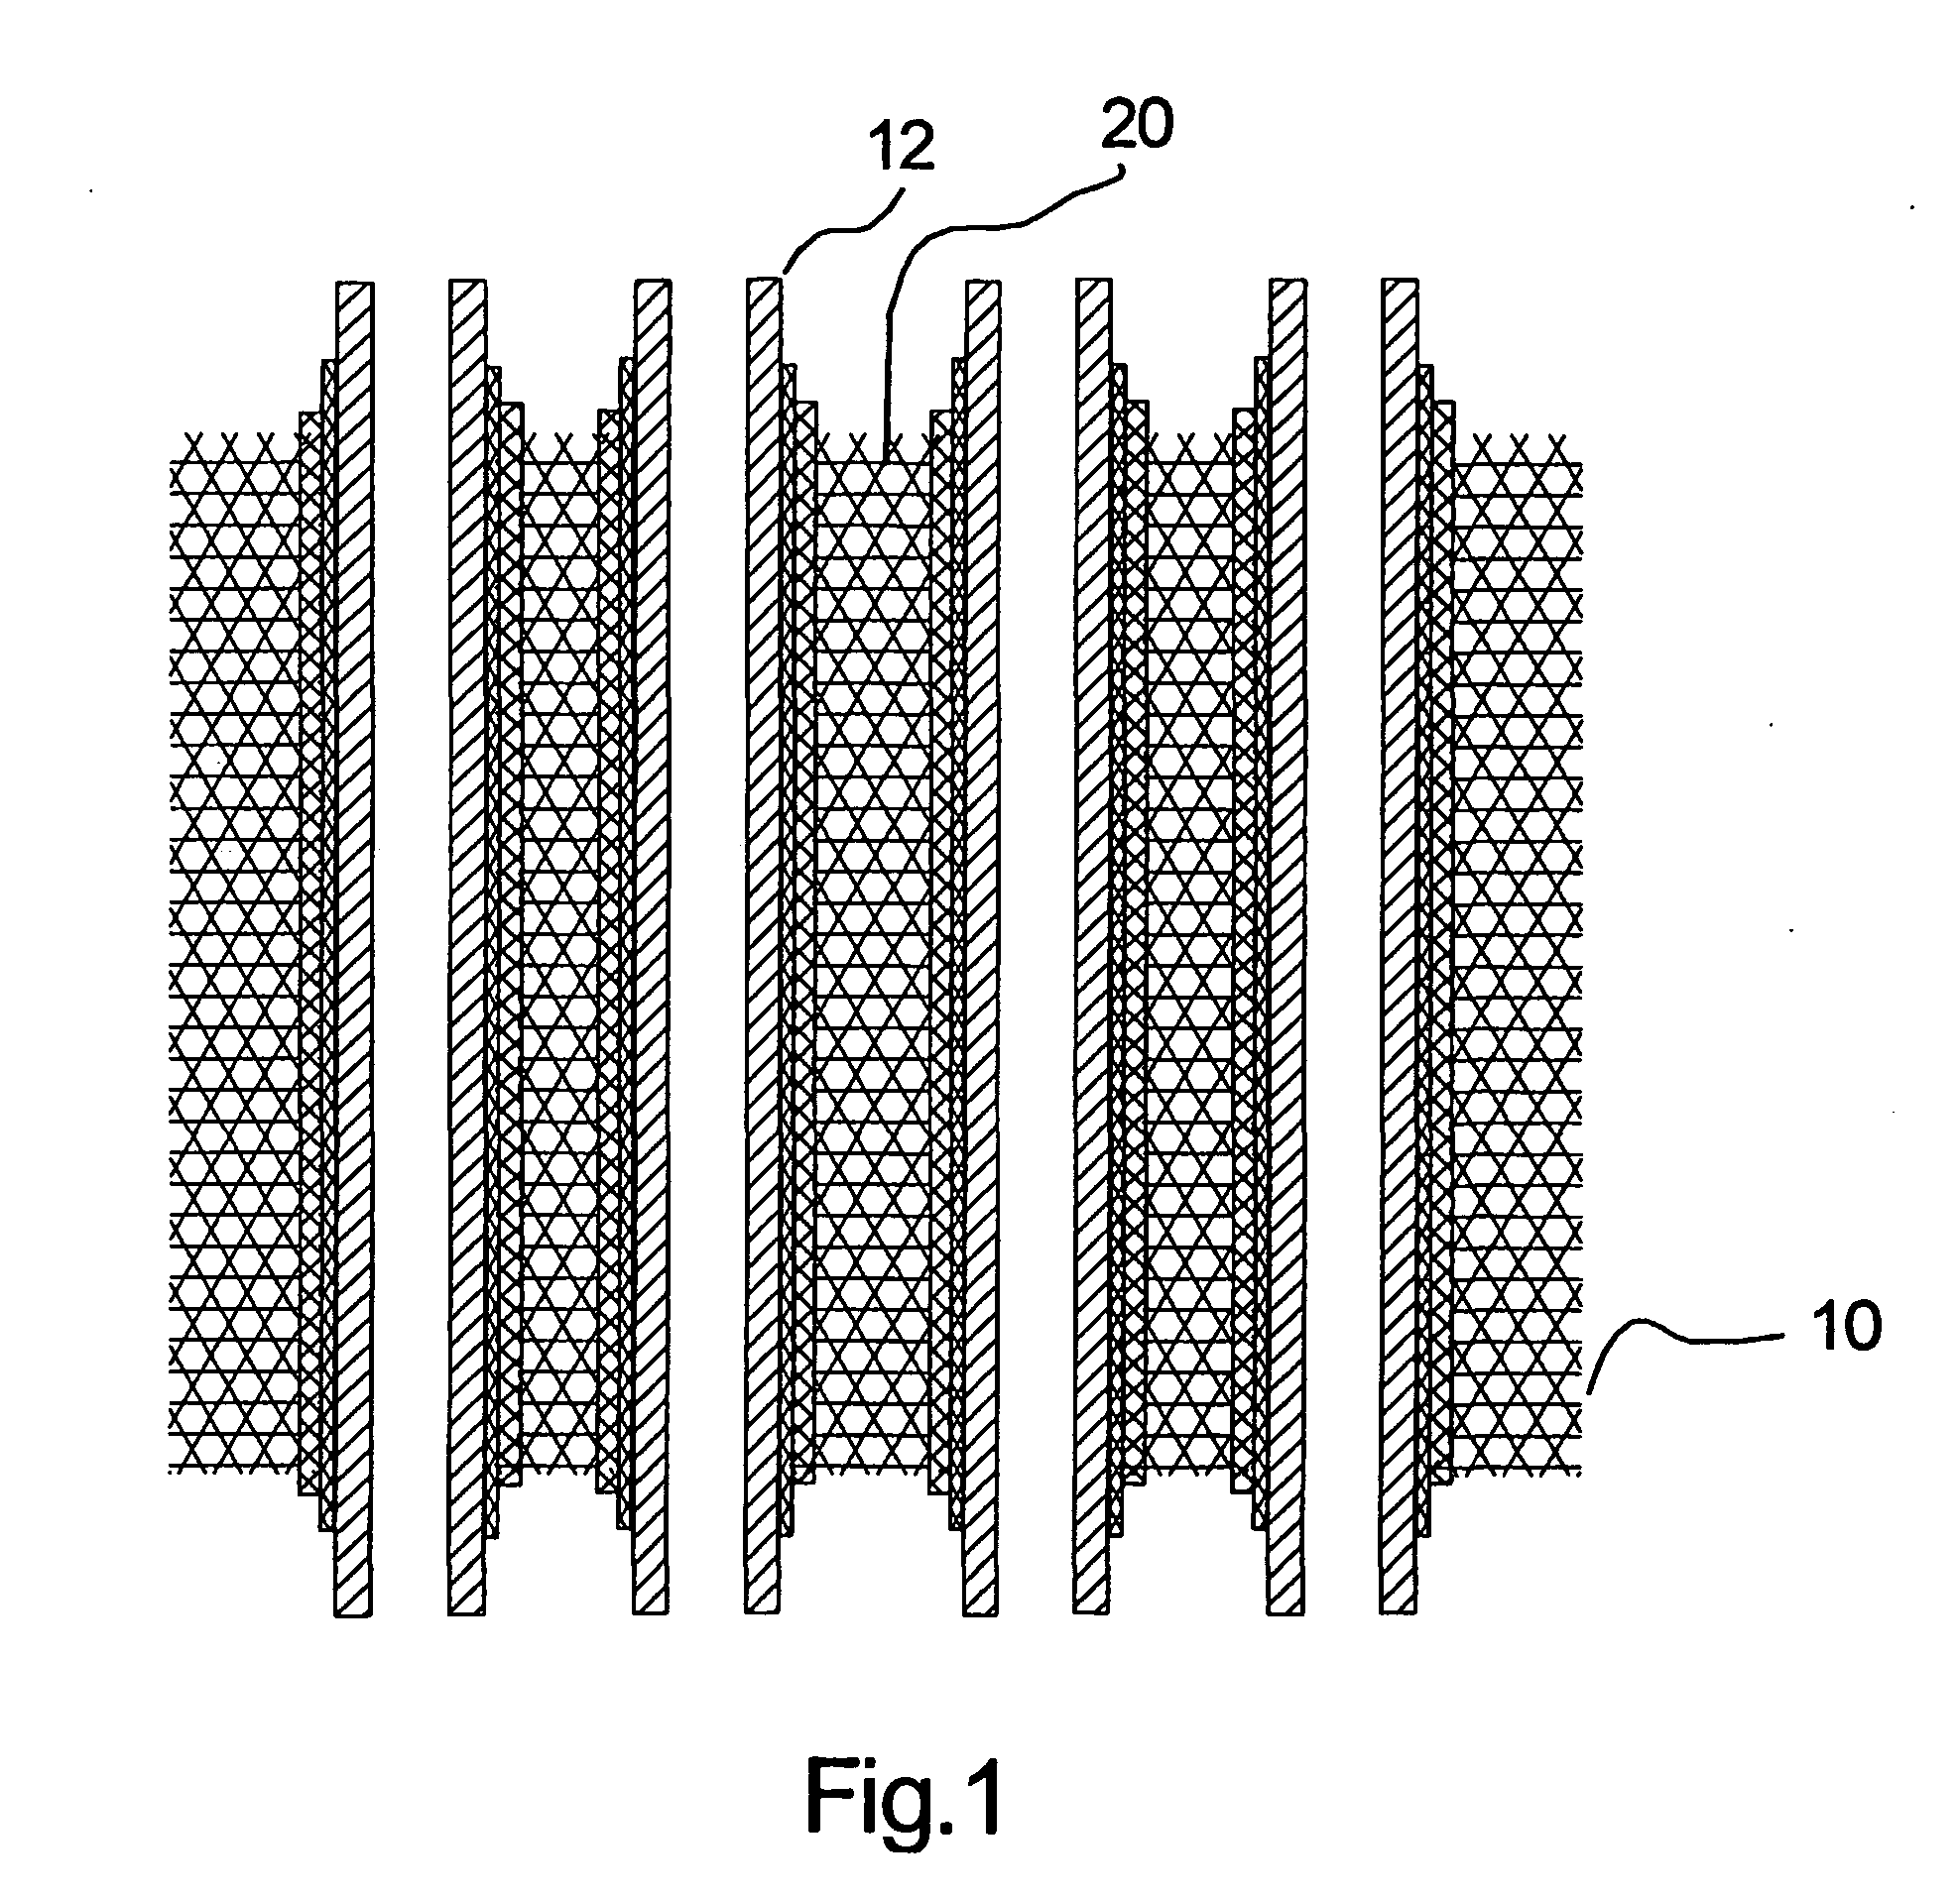 Tubular solid oxide fuel cell stack